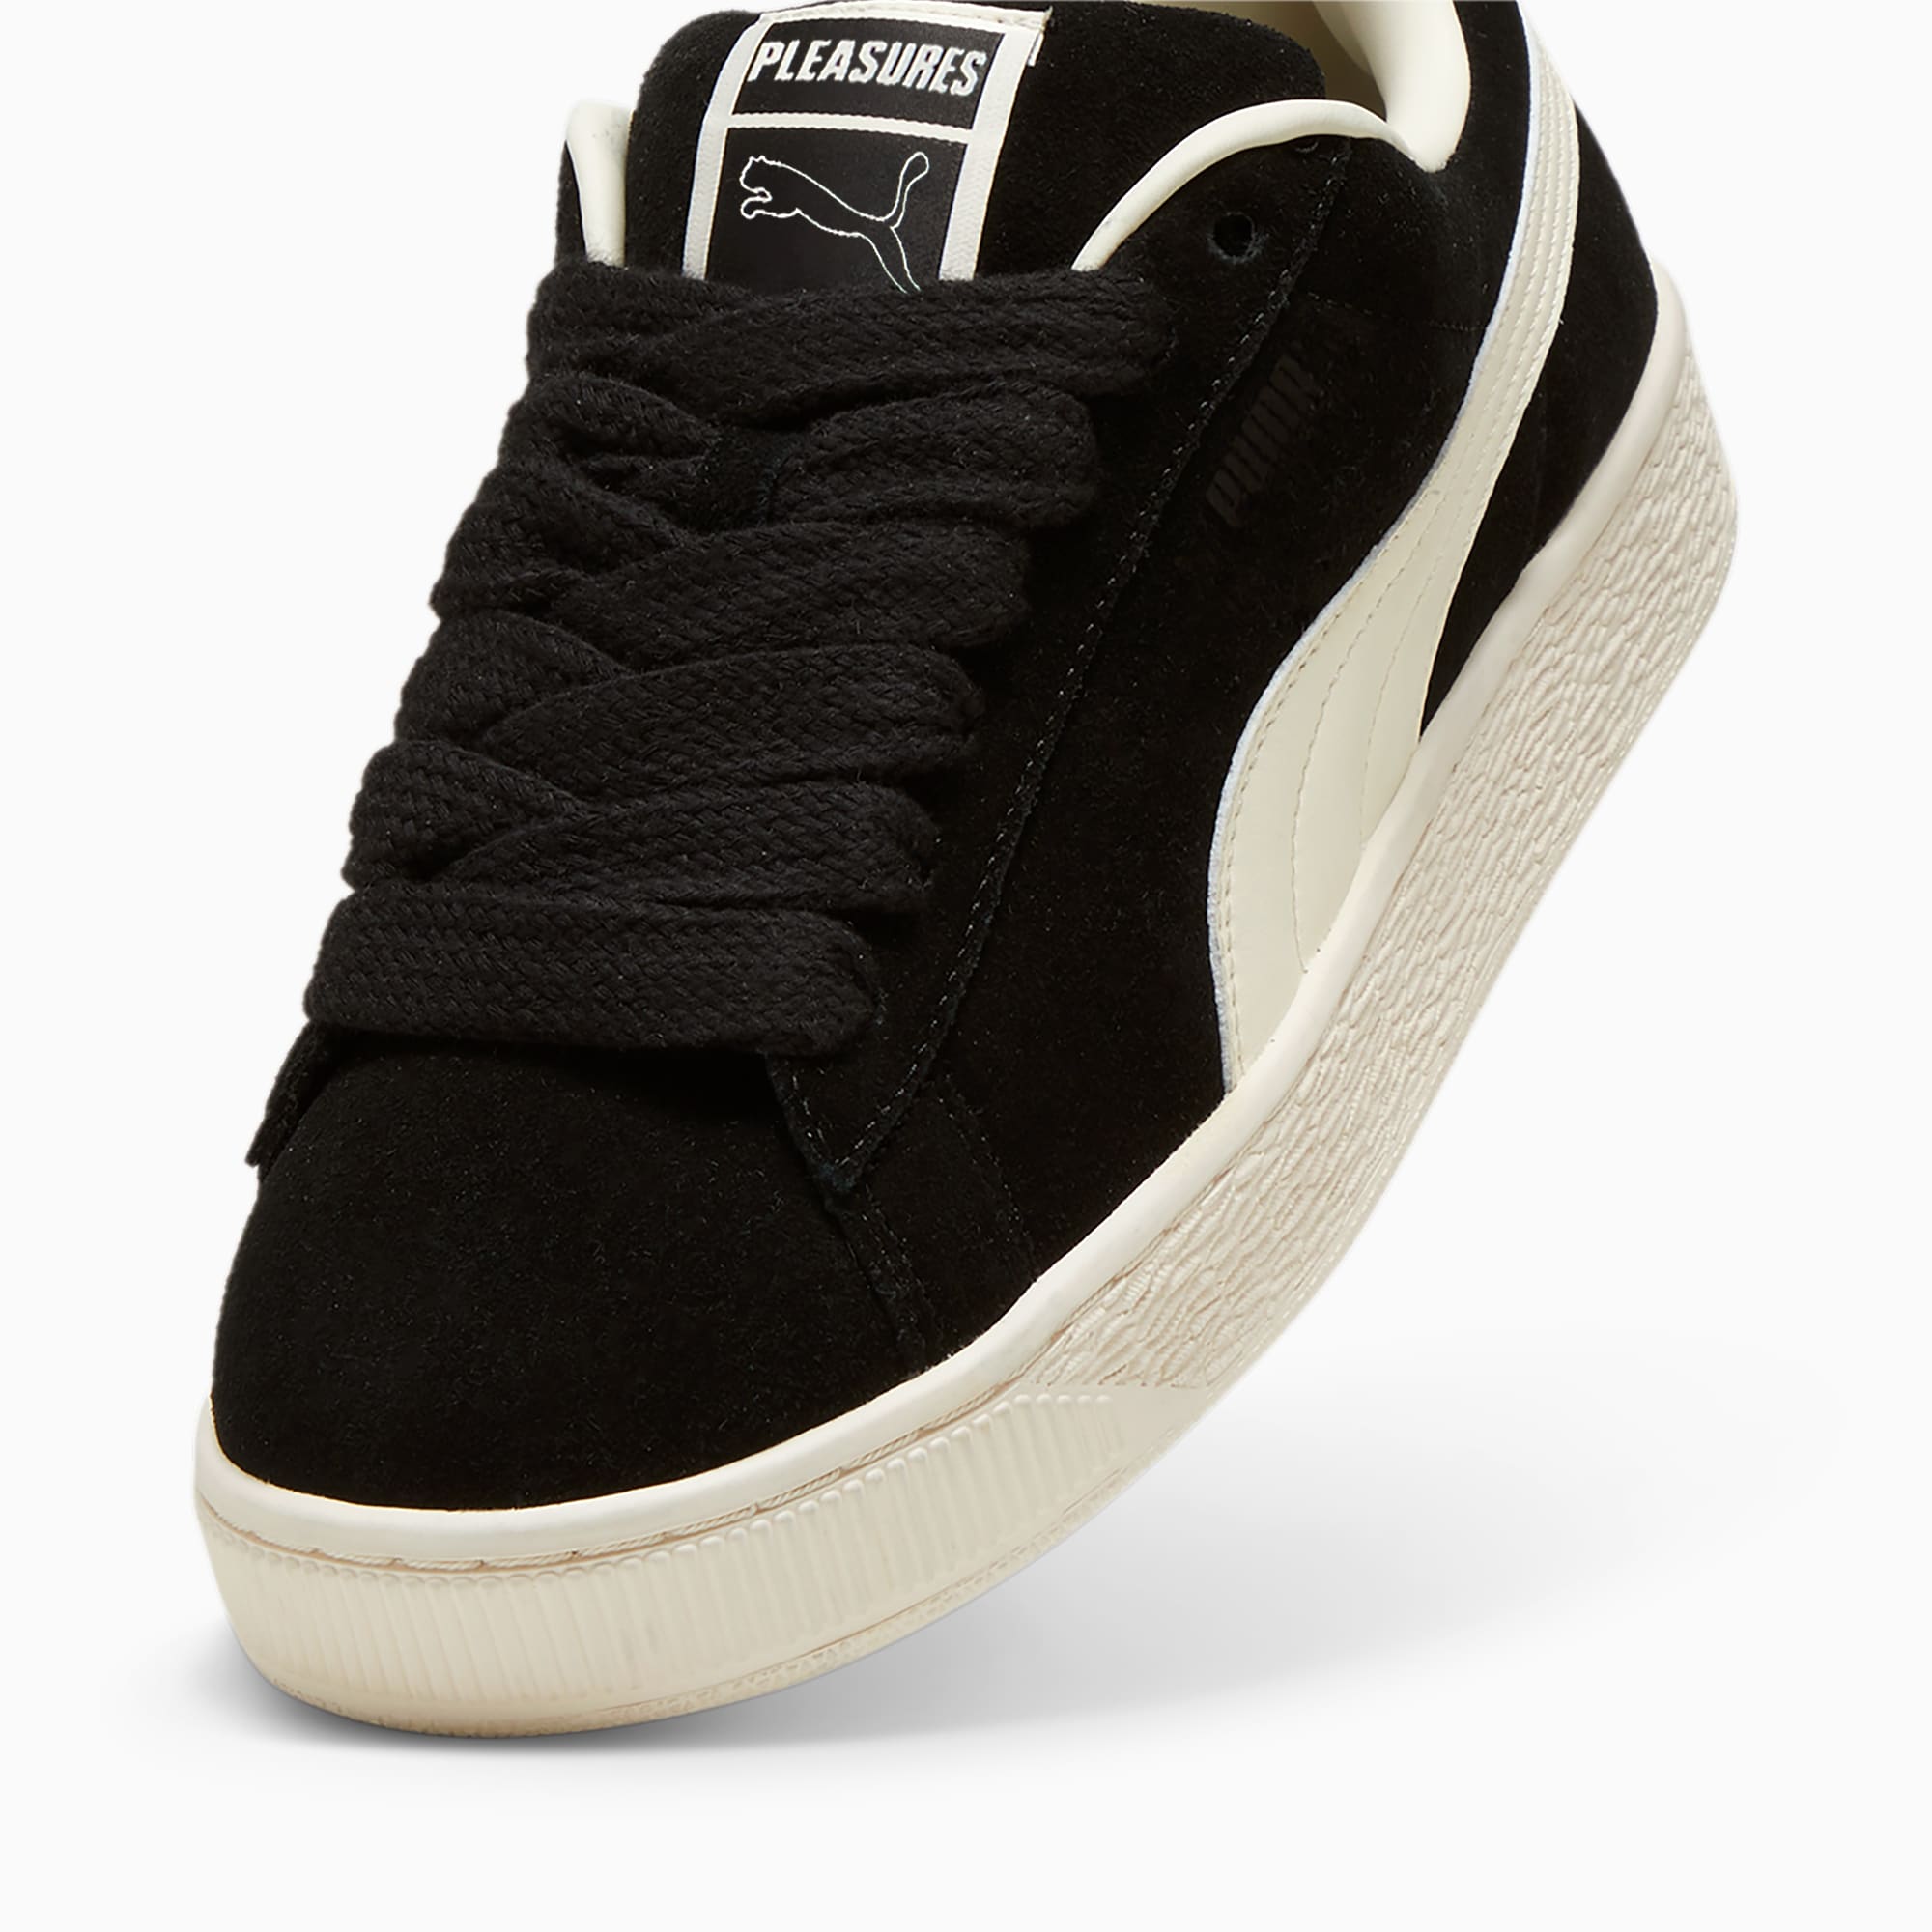 Women's PUMA X Pleasures Suede Xl Sneakers, Black/Frosted Ivory, Size 39, Shoes